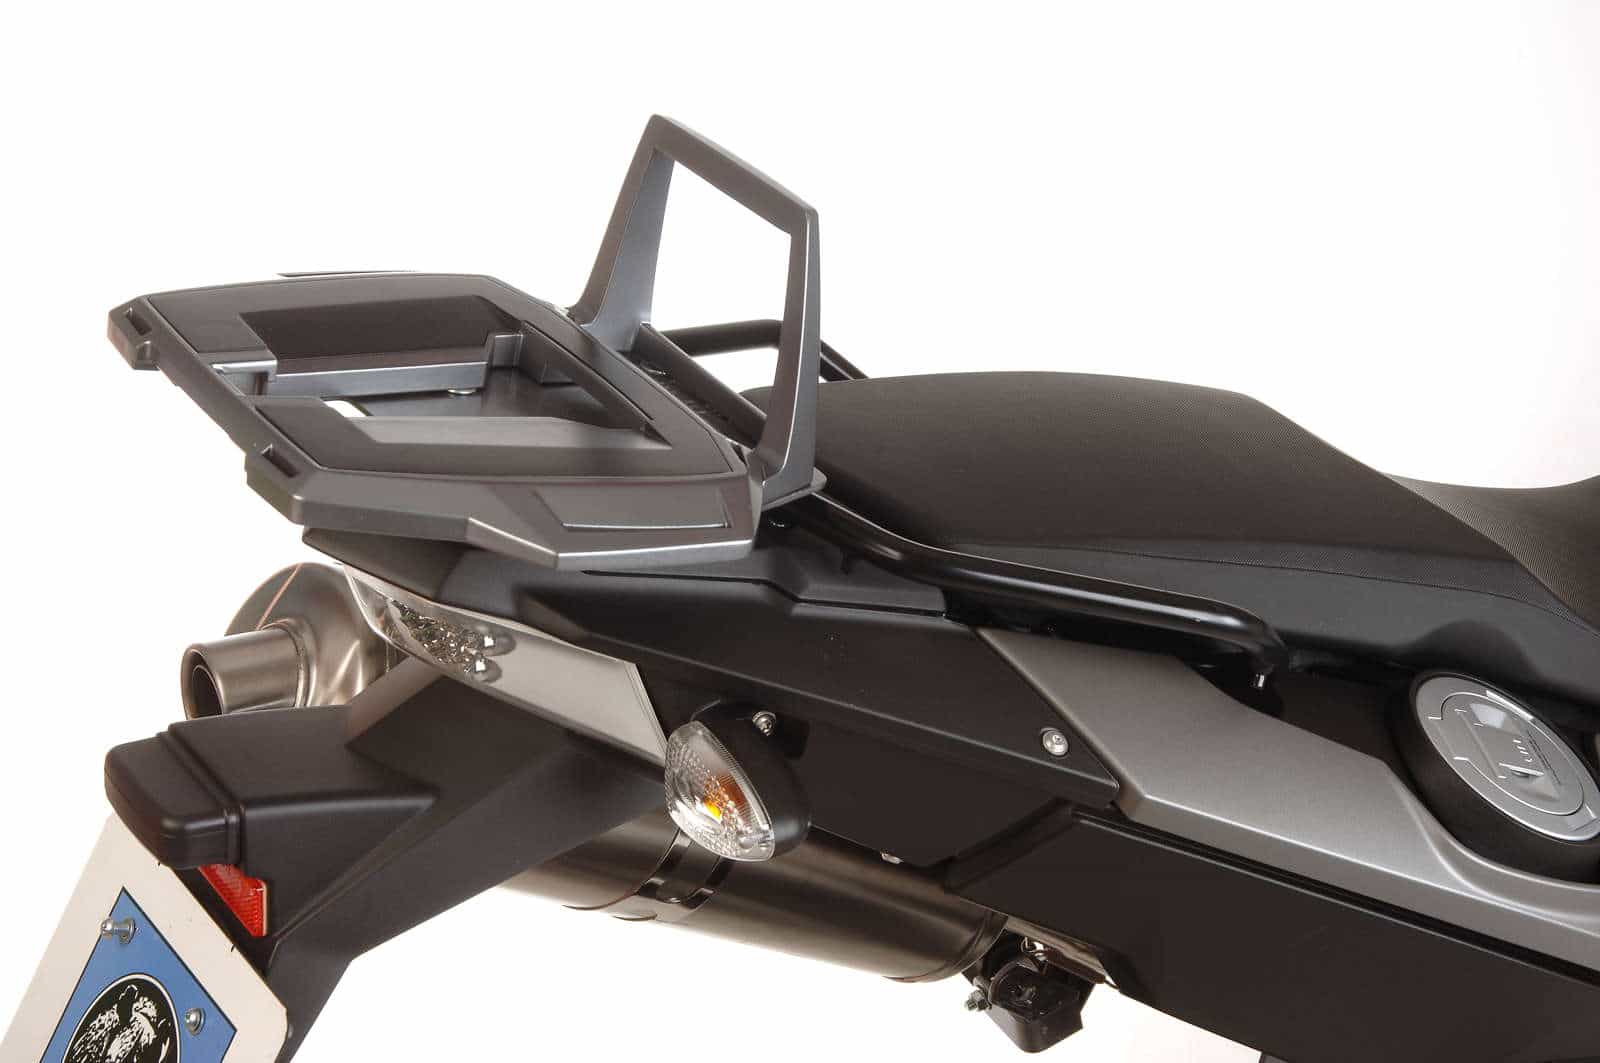 Alurack top case carrier black for BMW F 800 GS (2008-2018)